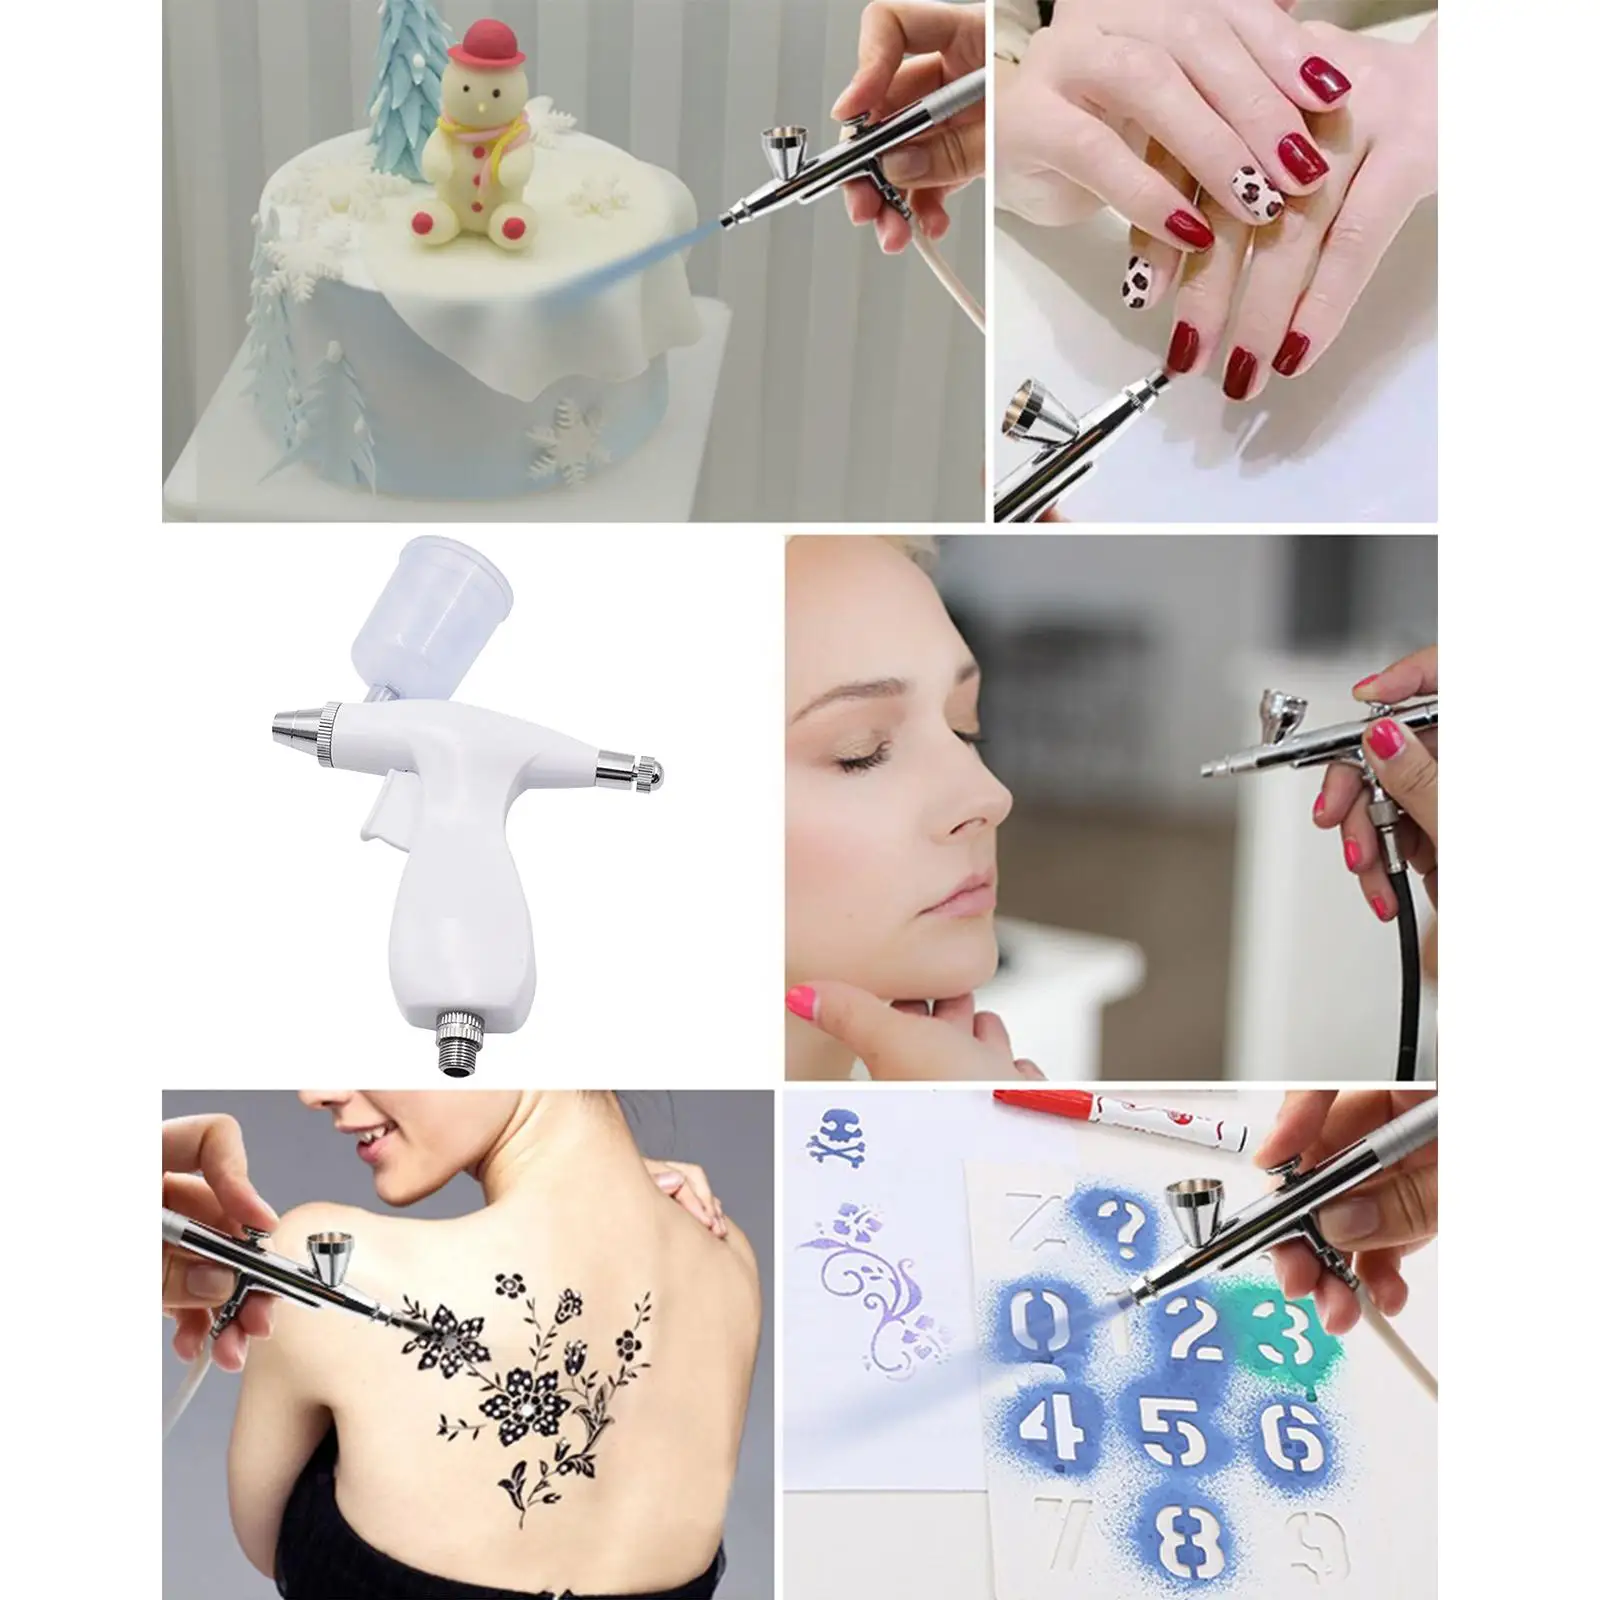 Mini Airbrush Spray Gun 1/8 Connector 0.4mm Nozzle Airbrush Nozzle for Makeup Model Painting Cake Decorating Manicure Nail Art